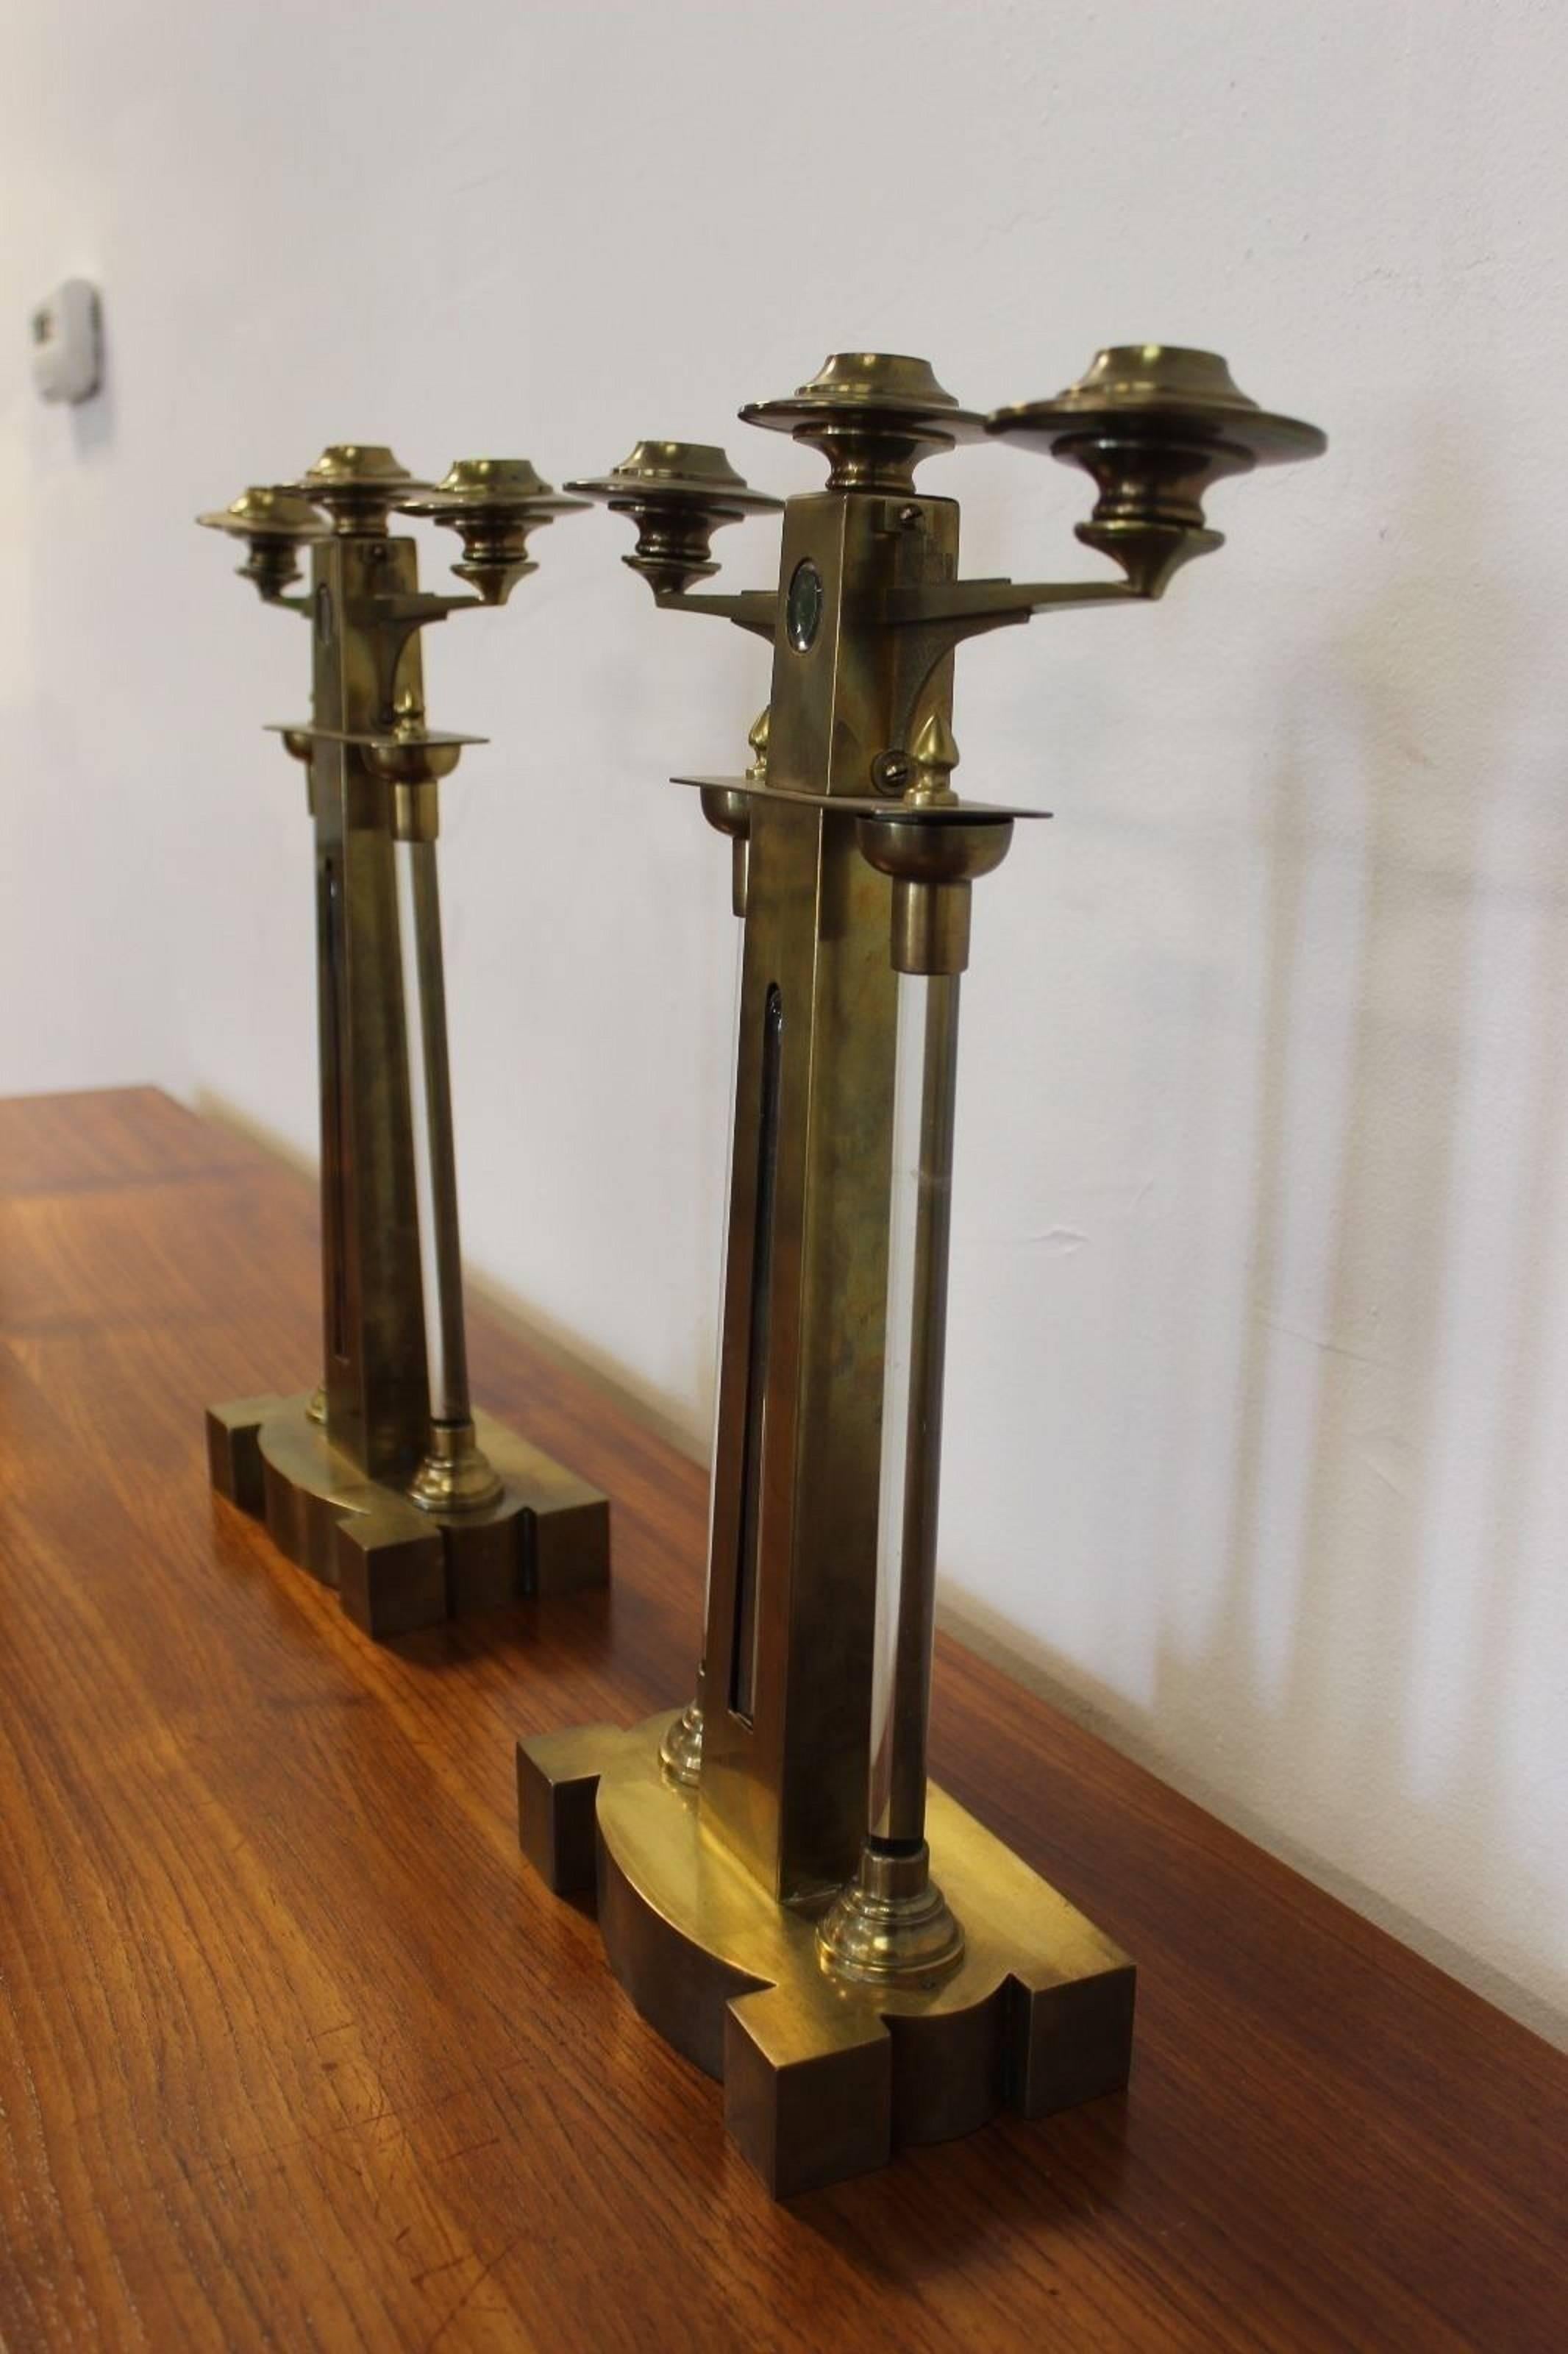 For your consideration are two fabulous candleholders from the 1920s. These fine vintage Austrian candleholders are made of brass and Lucite and were made at the pinnacle of the Vienna Secession design movement. A perfect addition to any Arts &